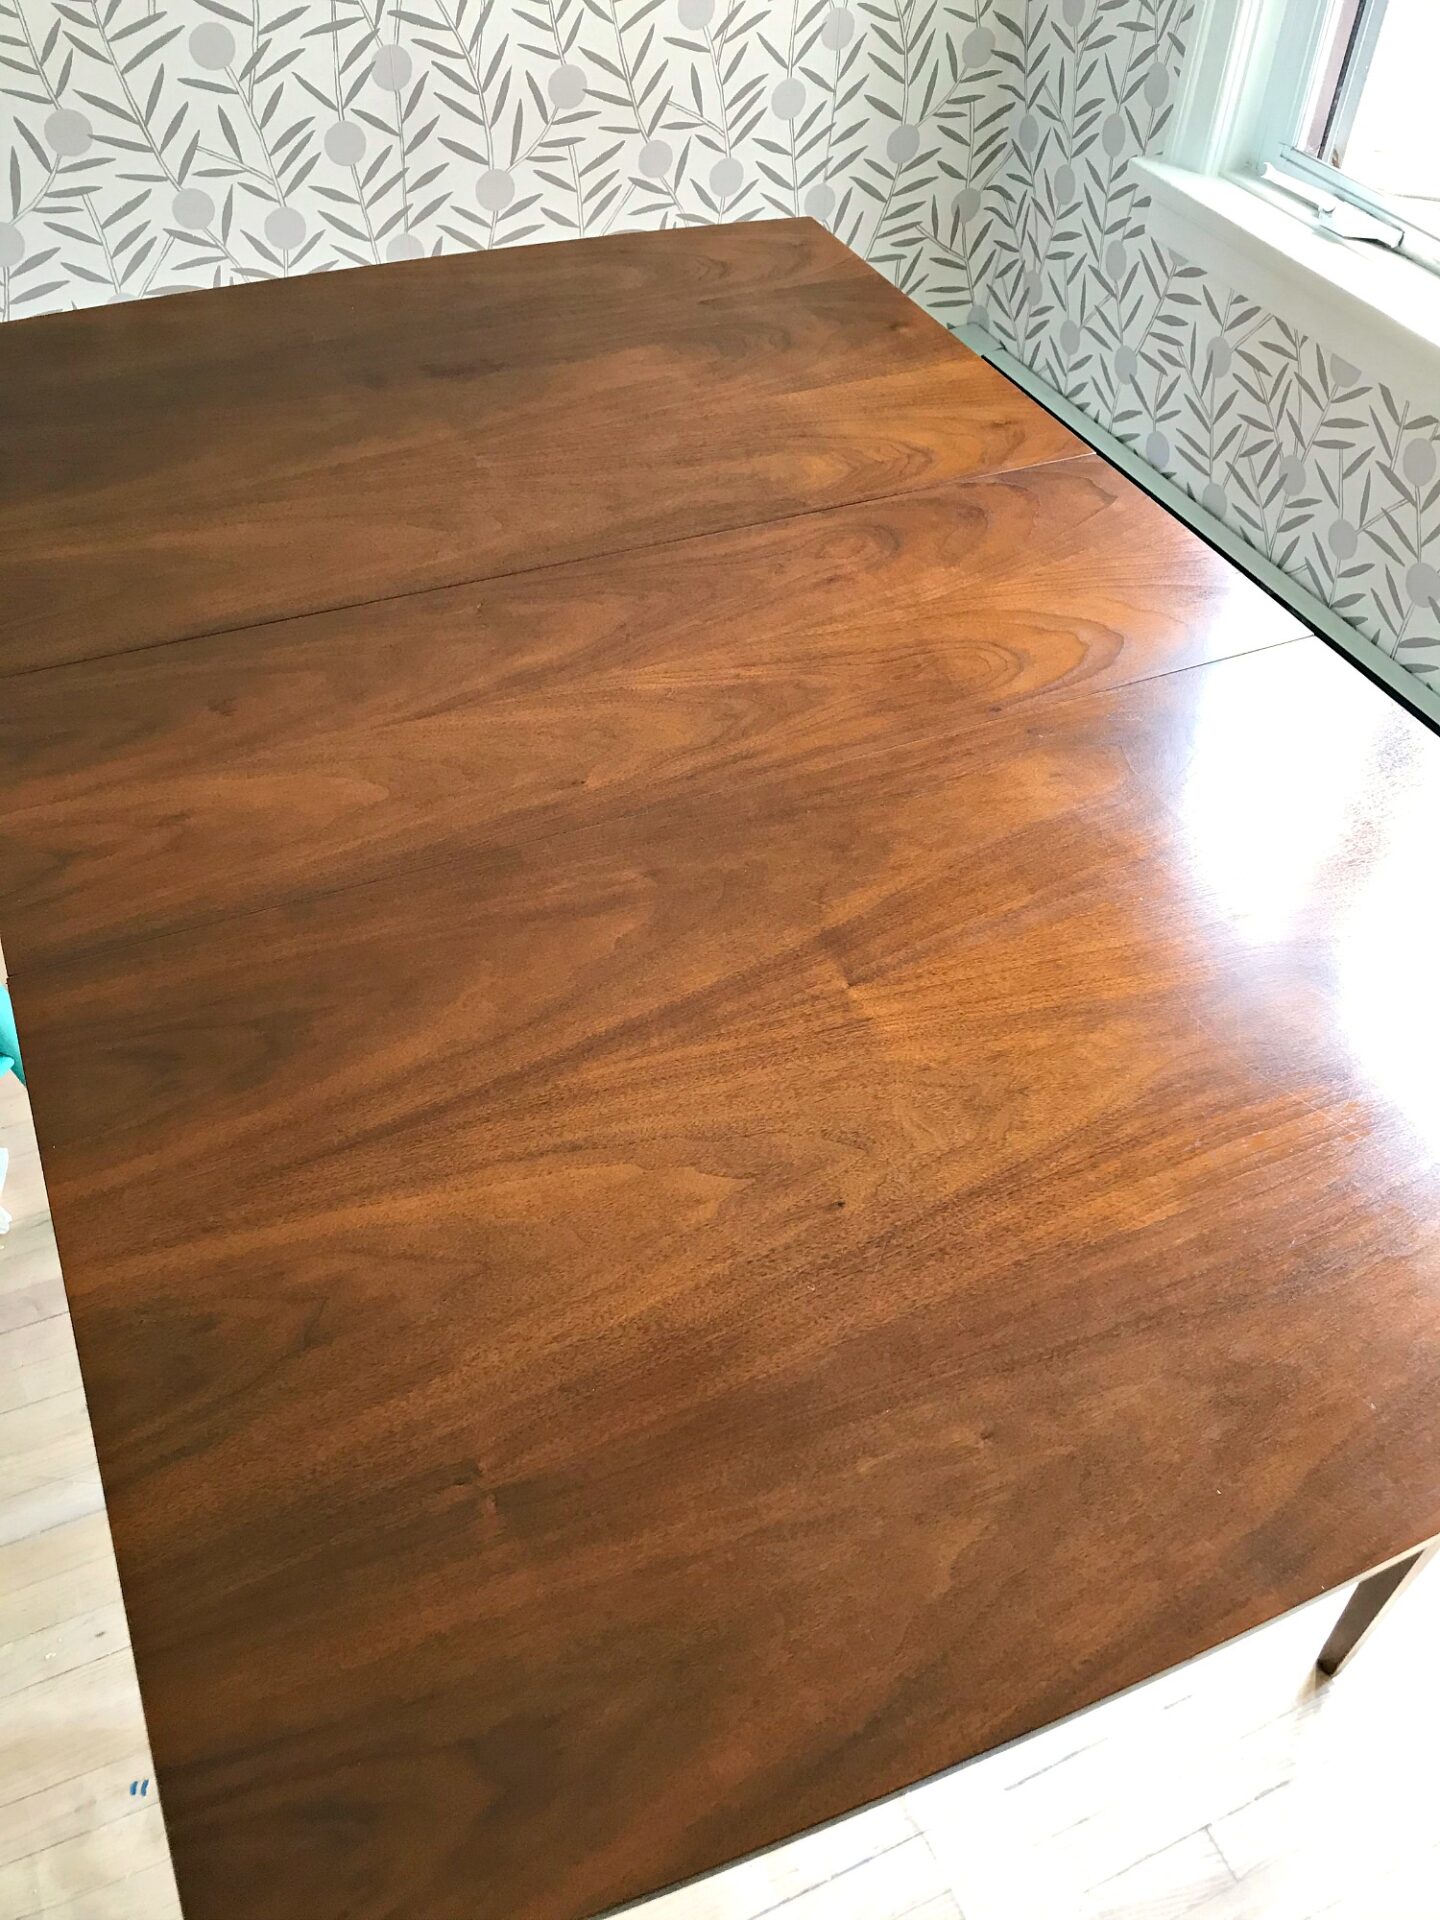 Refinish wood without stripping or sanding